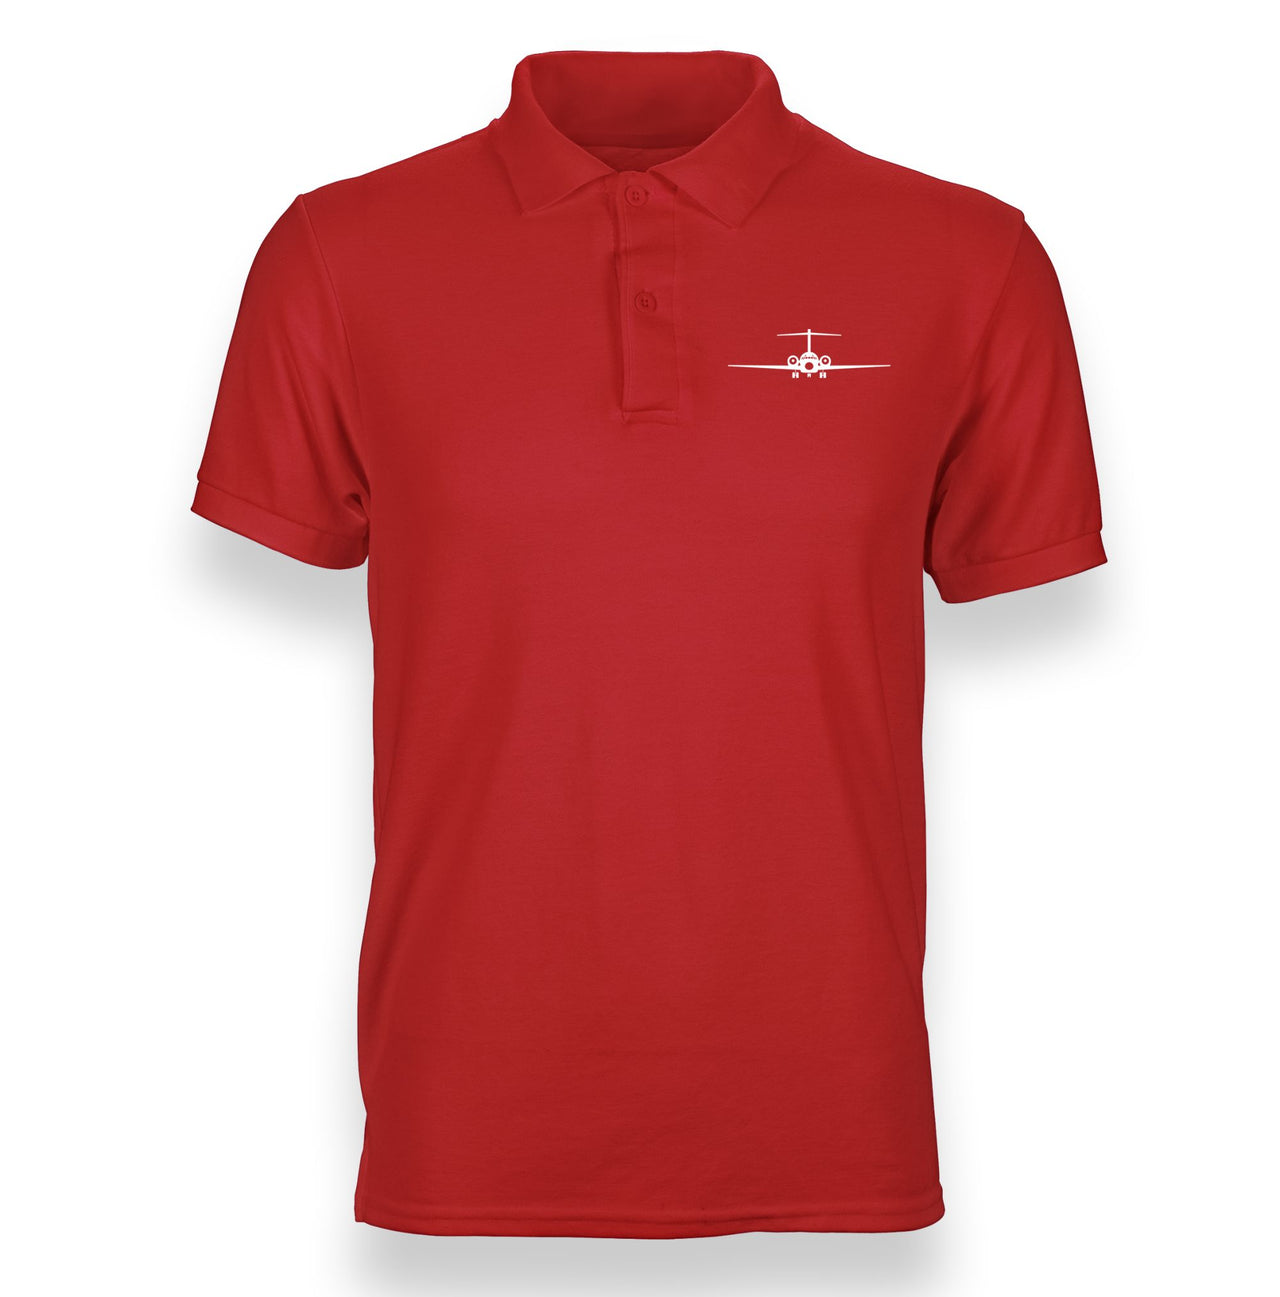 Boeing 717 Silhouette Designed "WOMEN" Polo T-Shirts